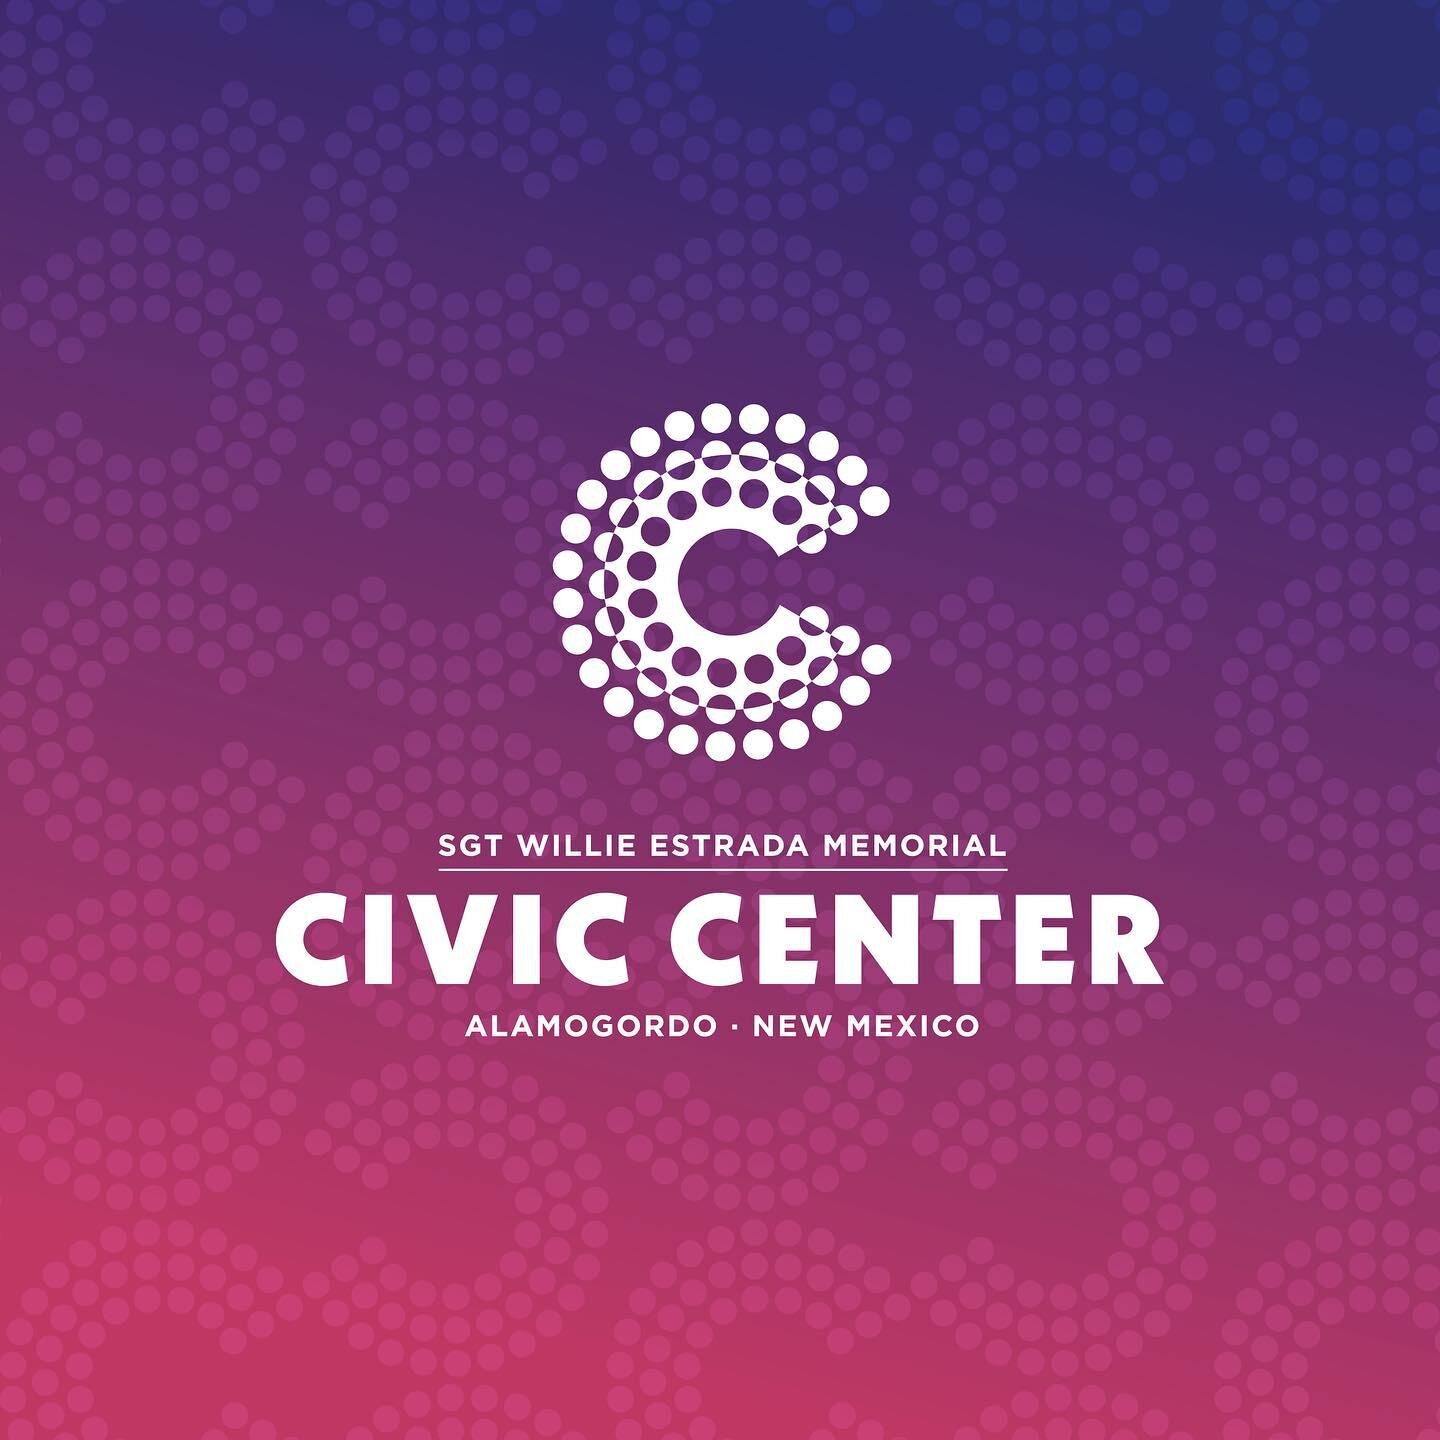 🎉We love a good party so that means we were extra excited to update the SGT Willie Estrada Memorial Civic Center logo in Alamogordo. As it was probably a challenge for you to read just now, a challenge for us when developing a new brand identity was